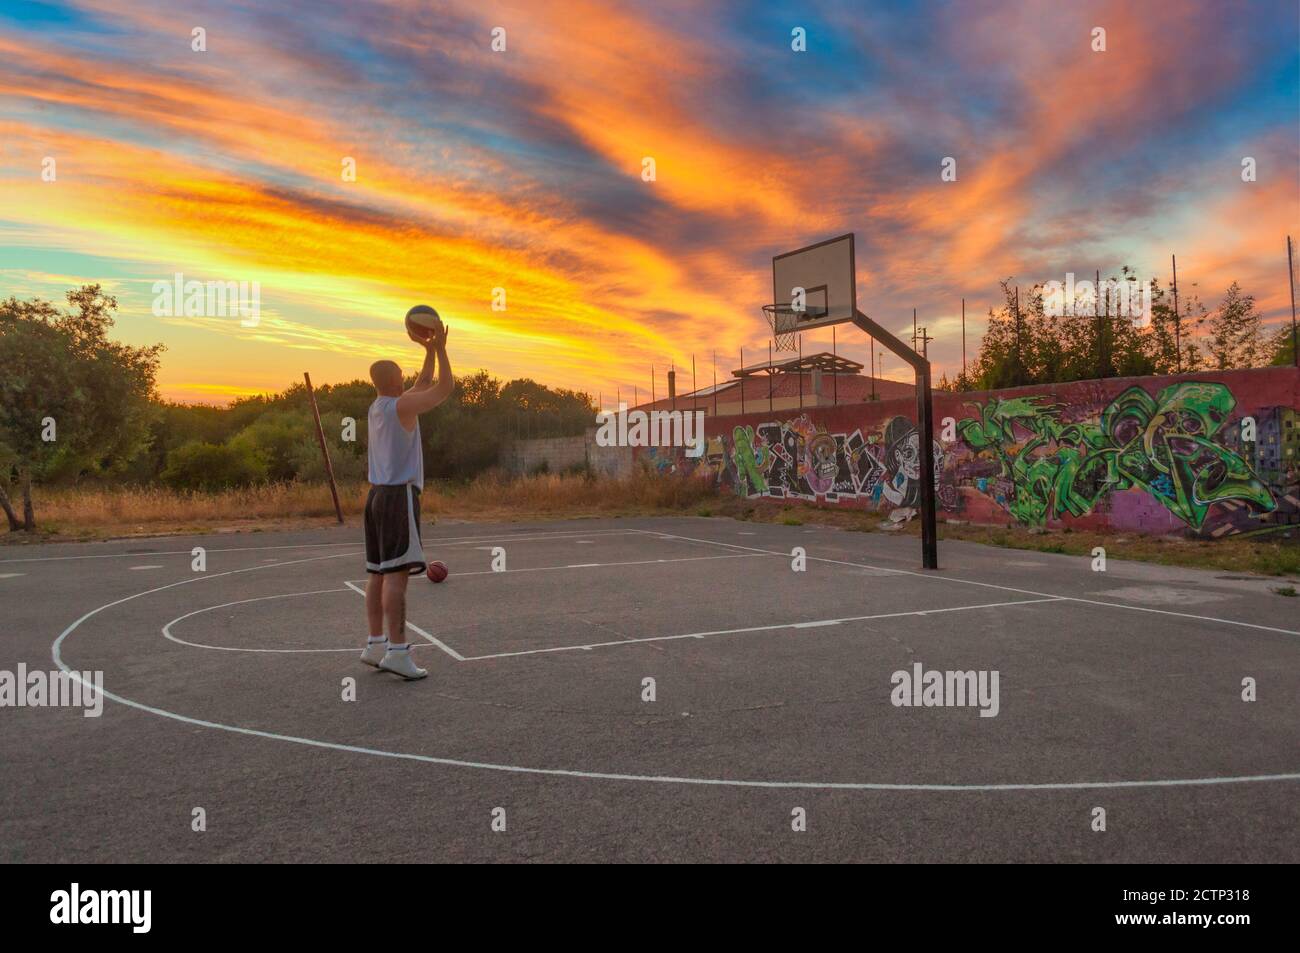 Basketball player shooting and training in city playground at